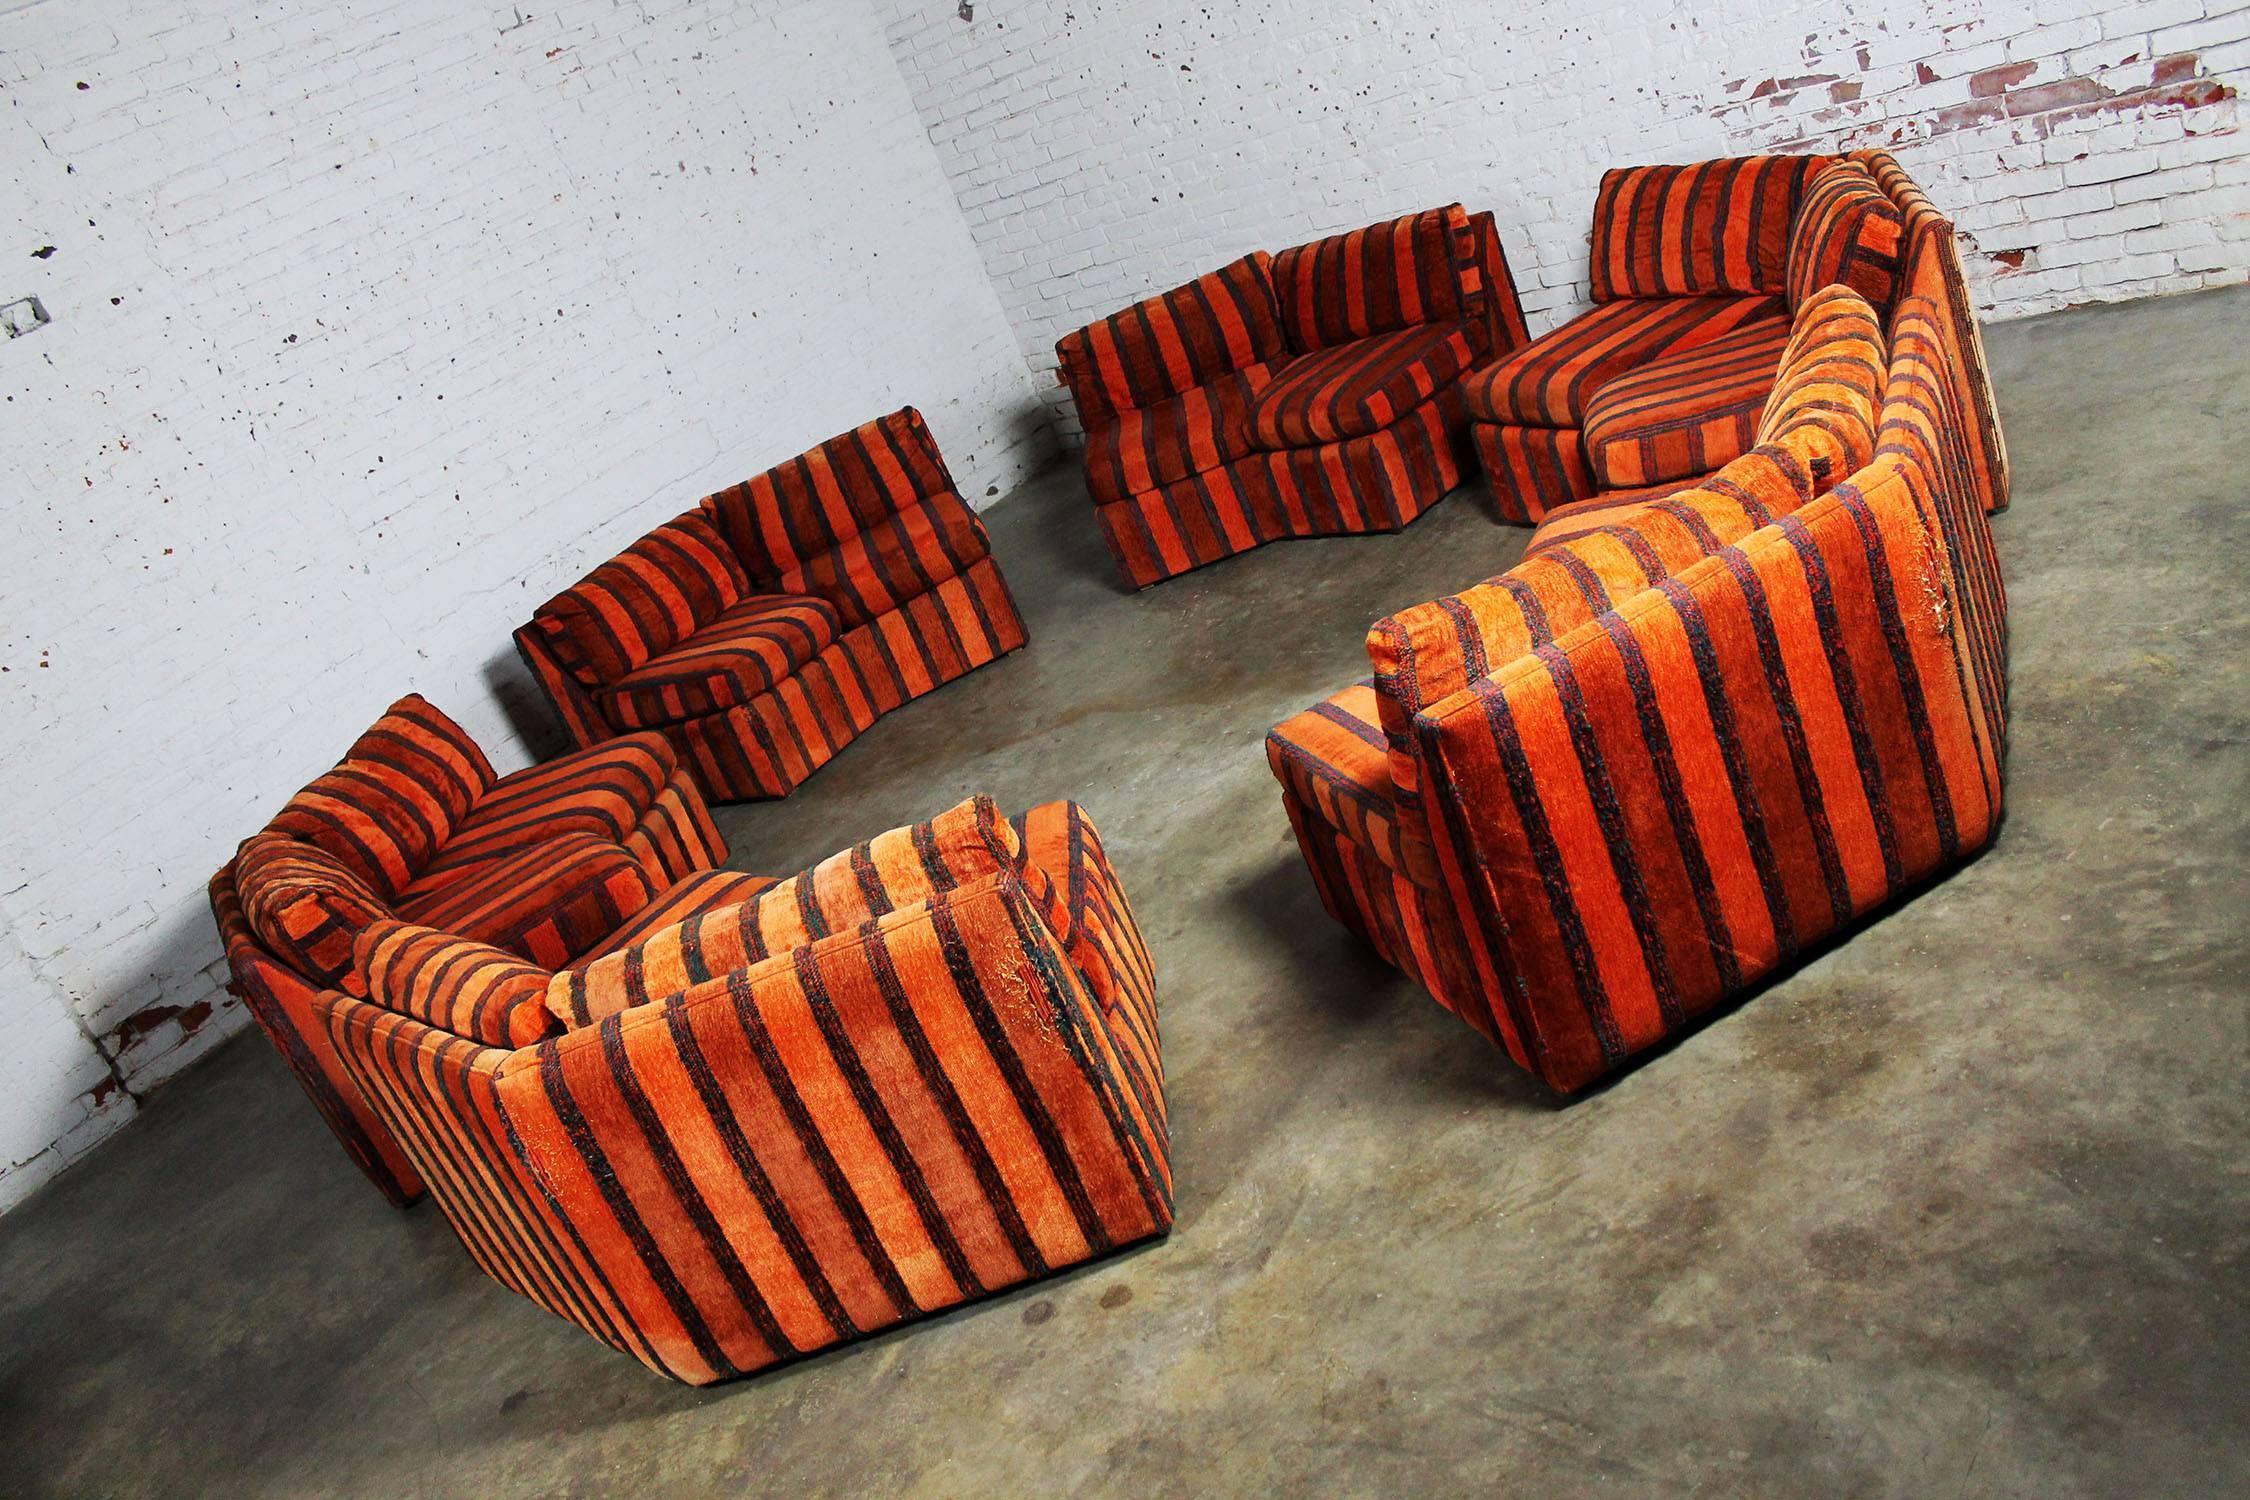 Incredible six-piece curved, circular, hexagonal sectional sofa by Bernhardt Ind. for their Flair Collection in the style of Milo Baughman. This sofa is in “needs to be recovered” condition. The bones are good but the fabulous orange and blue/black